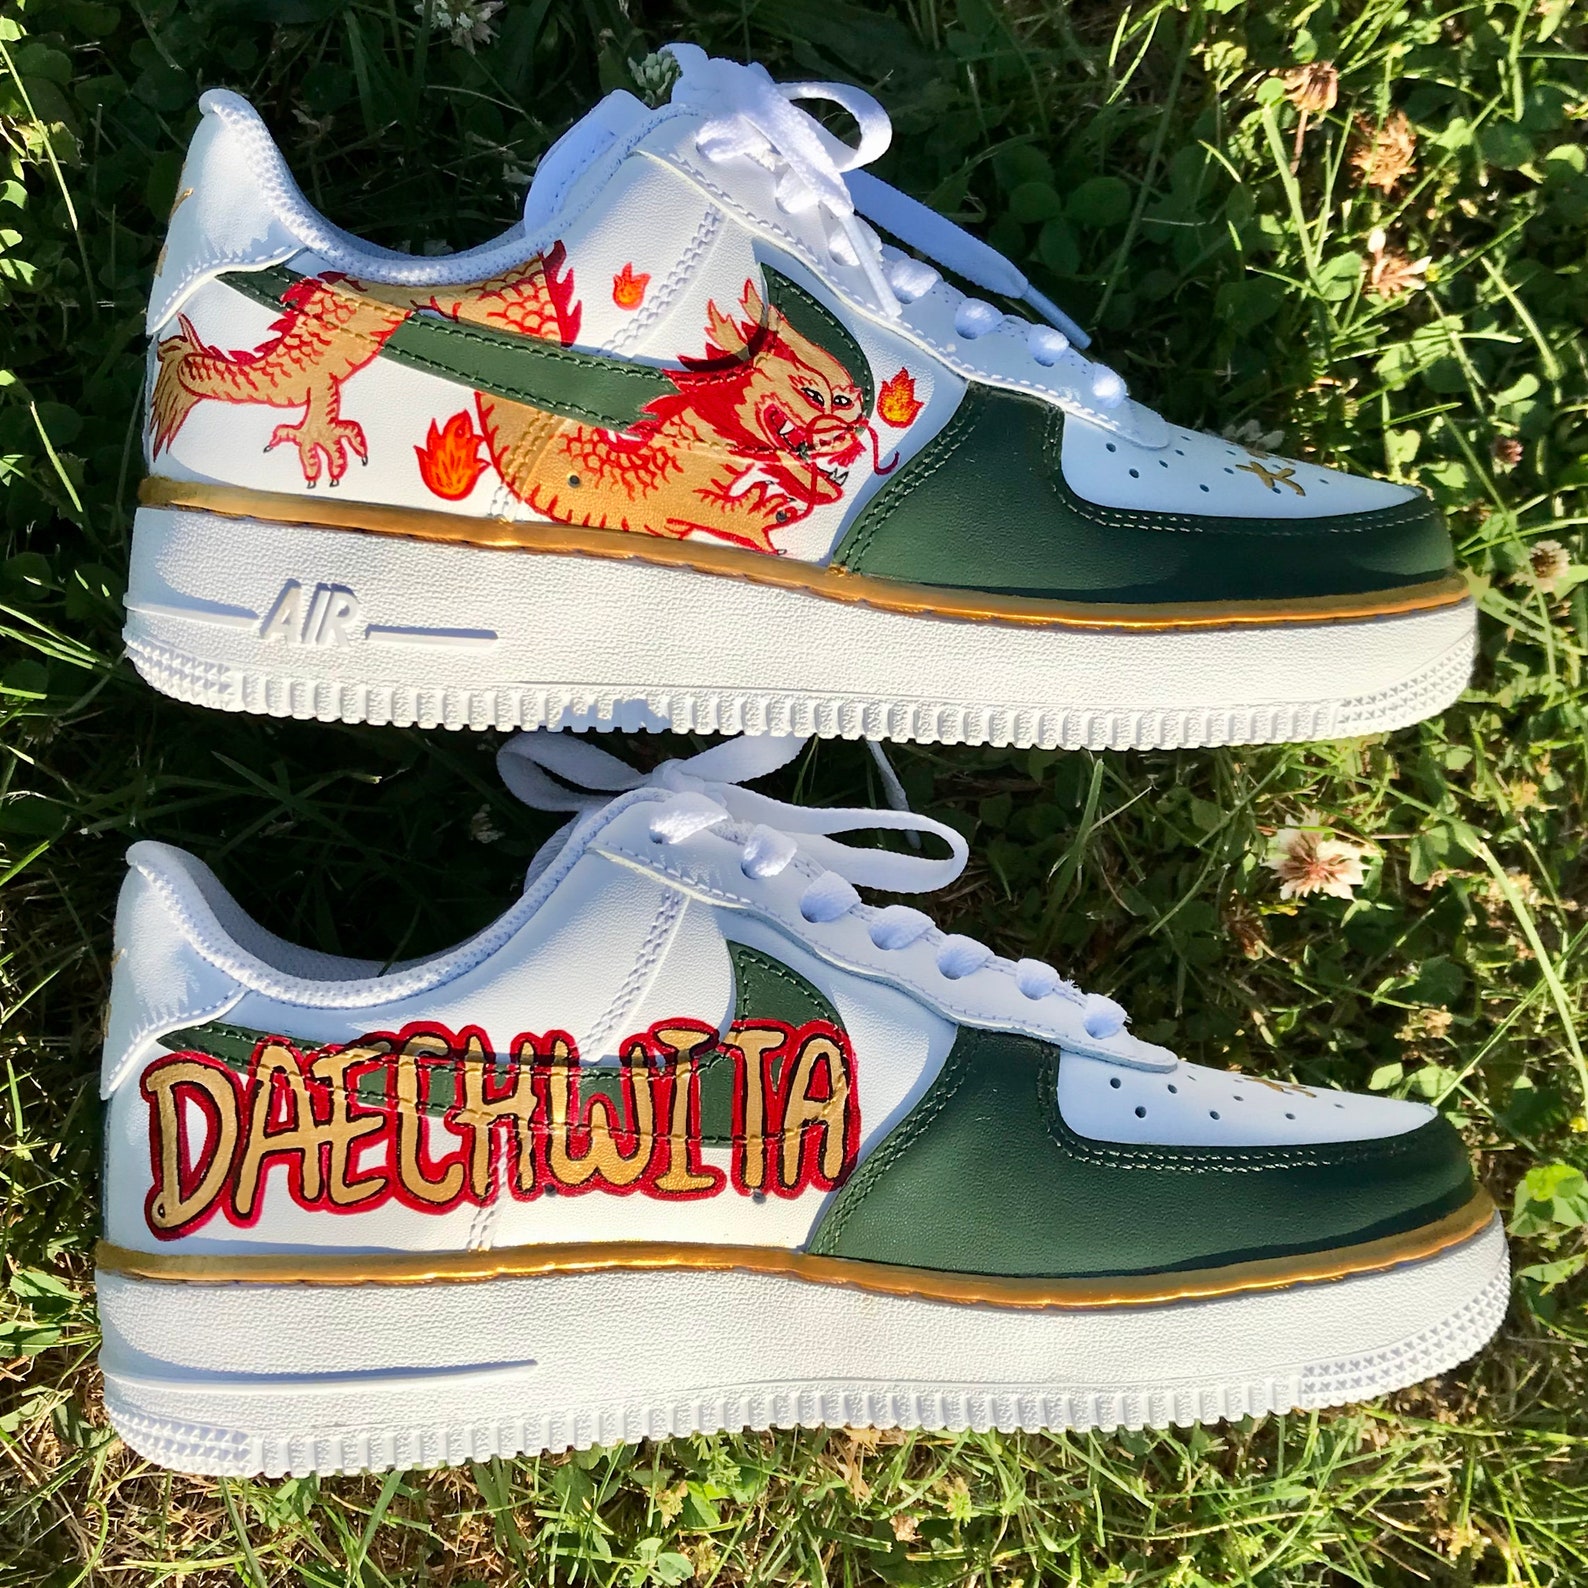  BTS Shoes  Air Force 1 Daechwita Handpainted Etsy